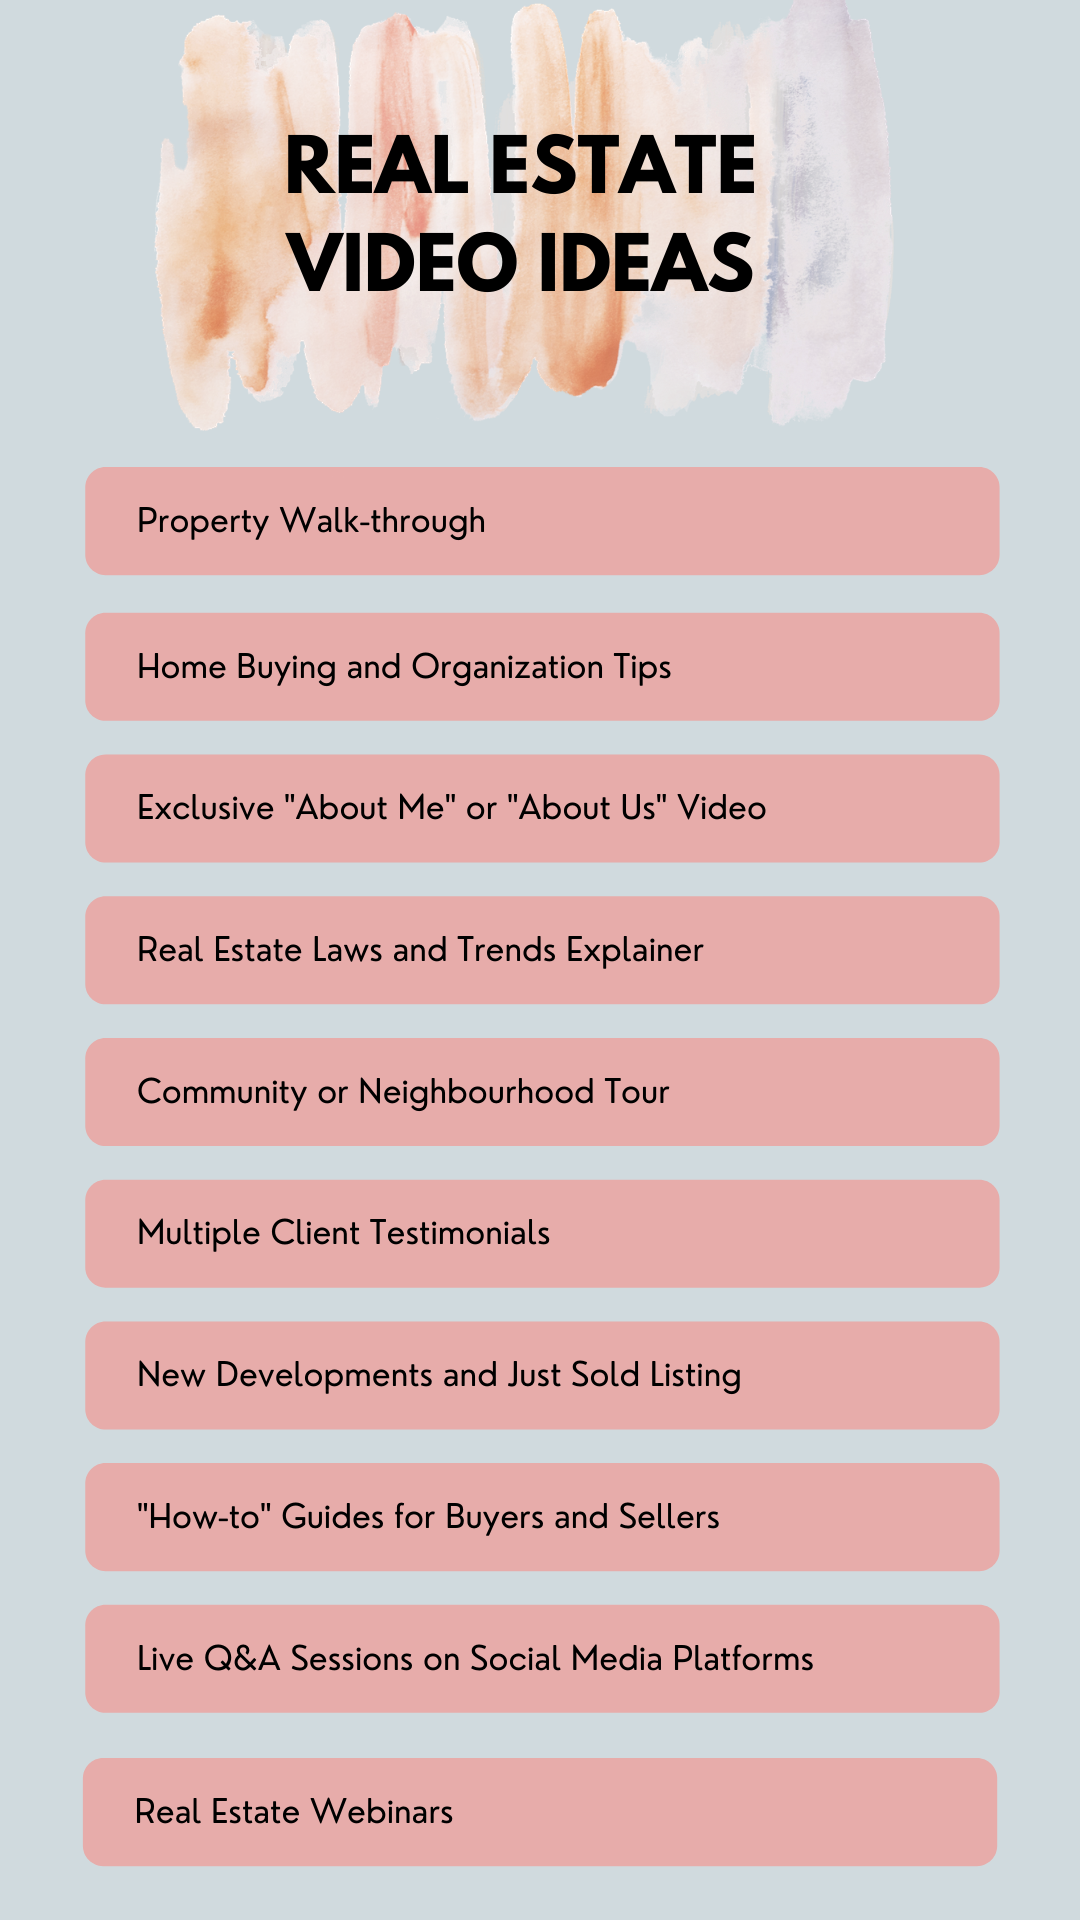 15 Real Estate Posts for Social Media to Get New Clients